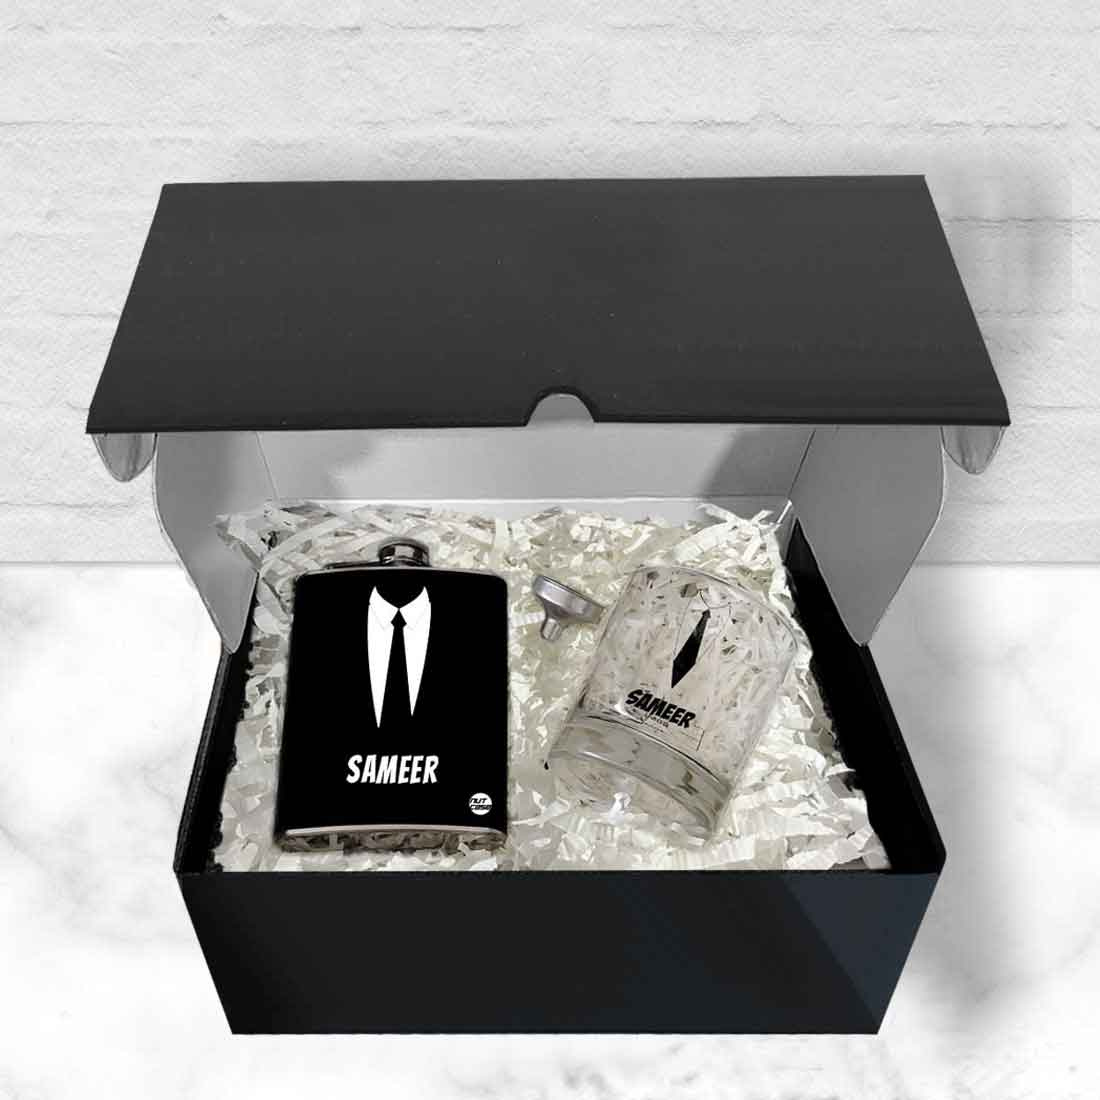 Personalized Whiskey Glass Hip Flask Gift Set Box - Suit Up